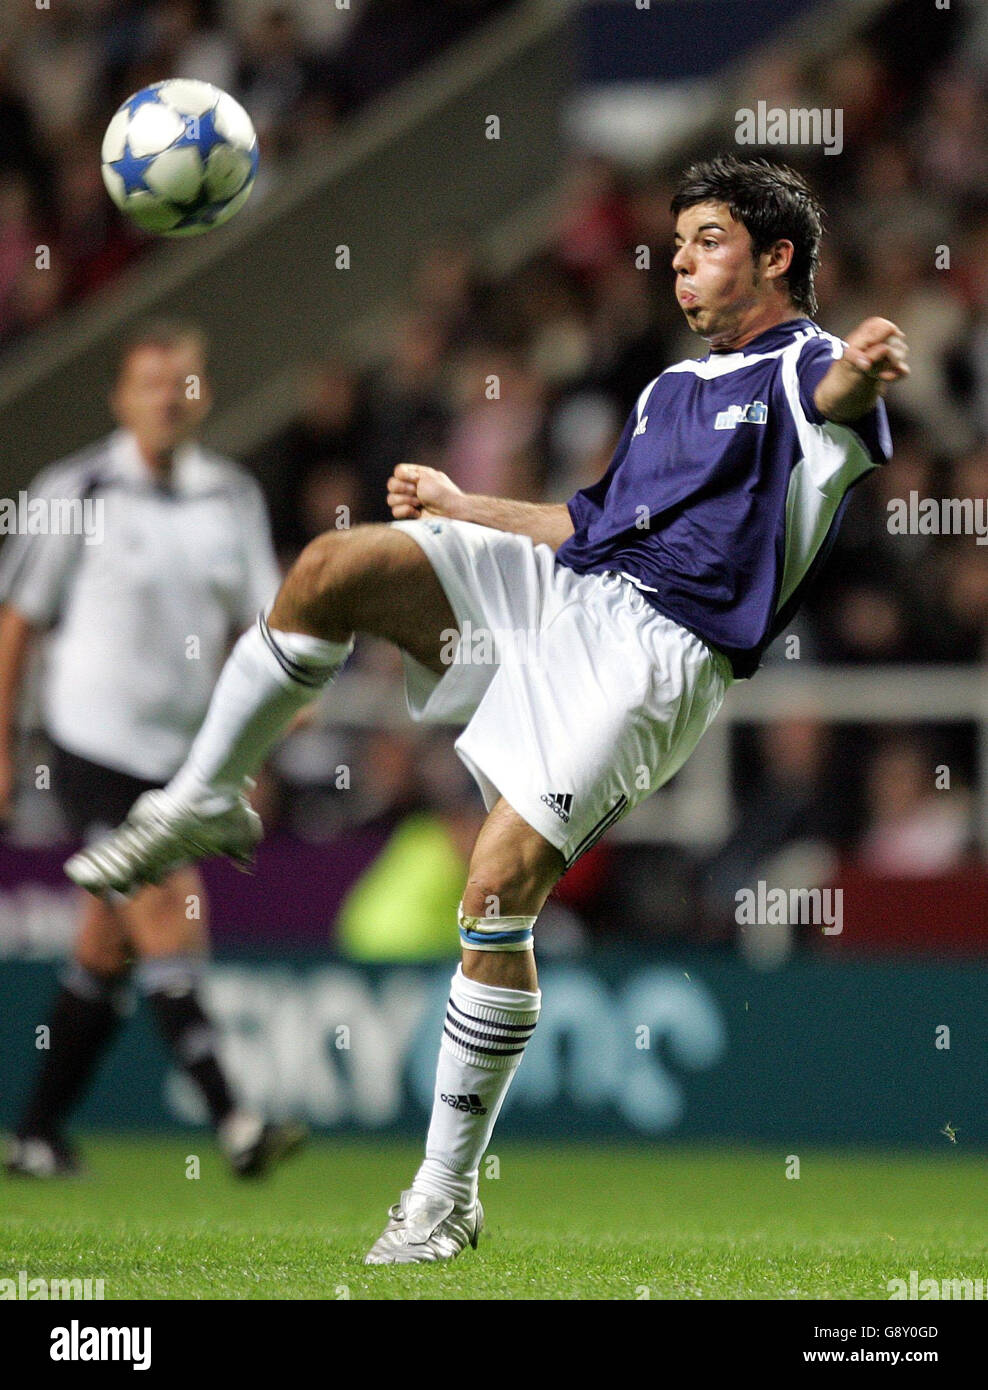 Anthony Hutton in action during The Match at St James Park, Sunday October 10, 2005. PRESS ASSOCIATION Photo. Photo credit should read: Owen Humphreys/PA Stock Photo